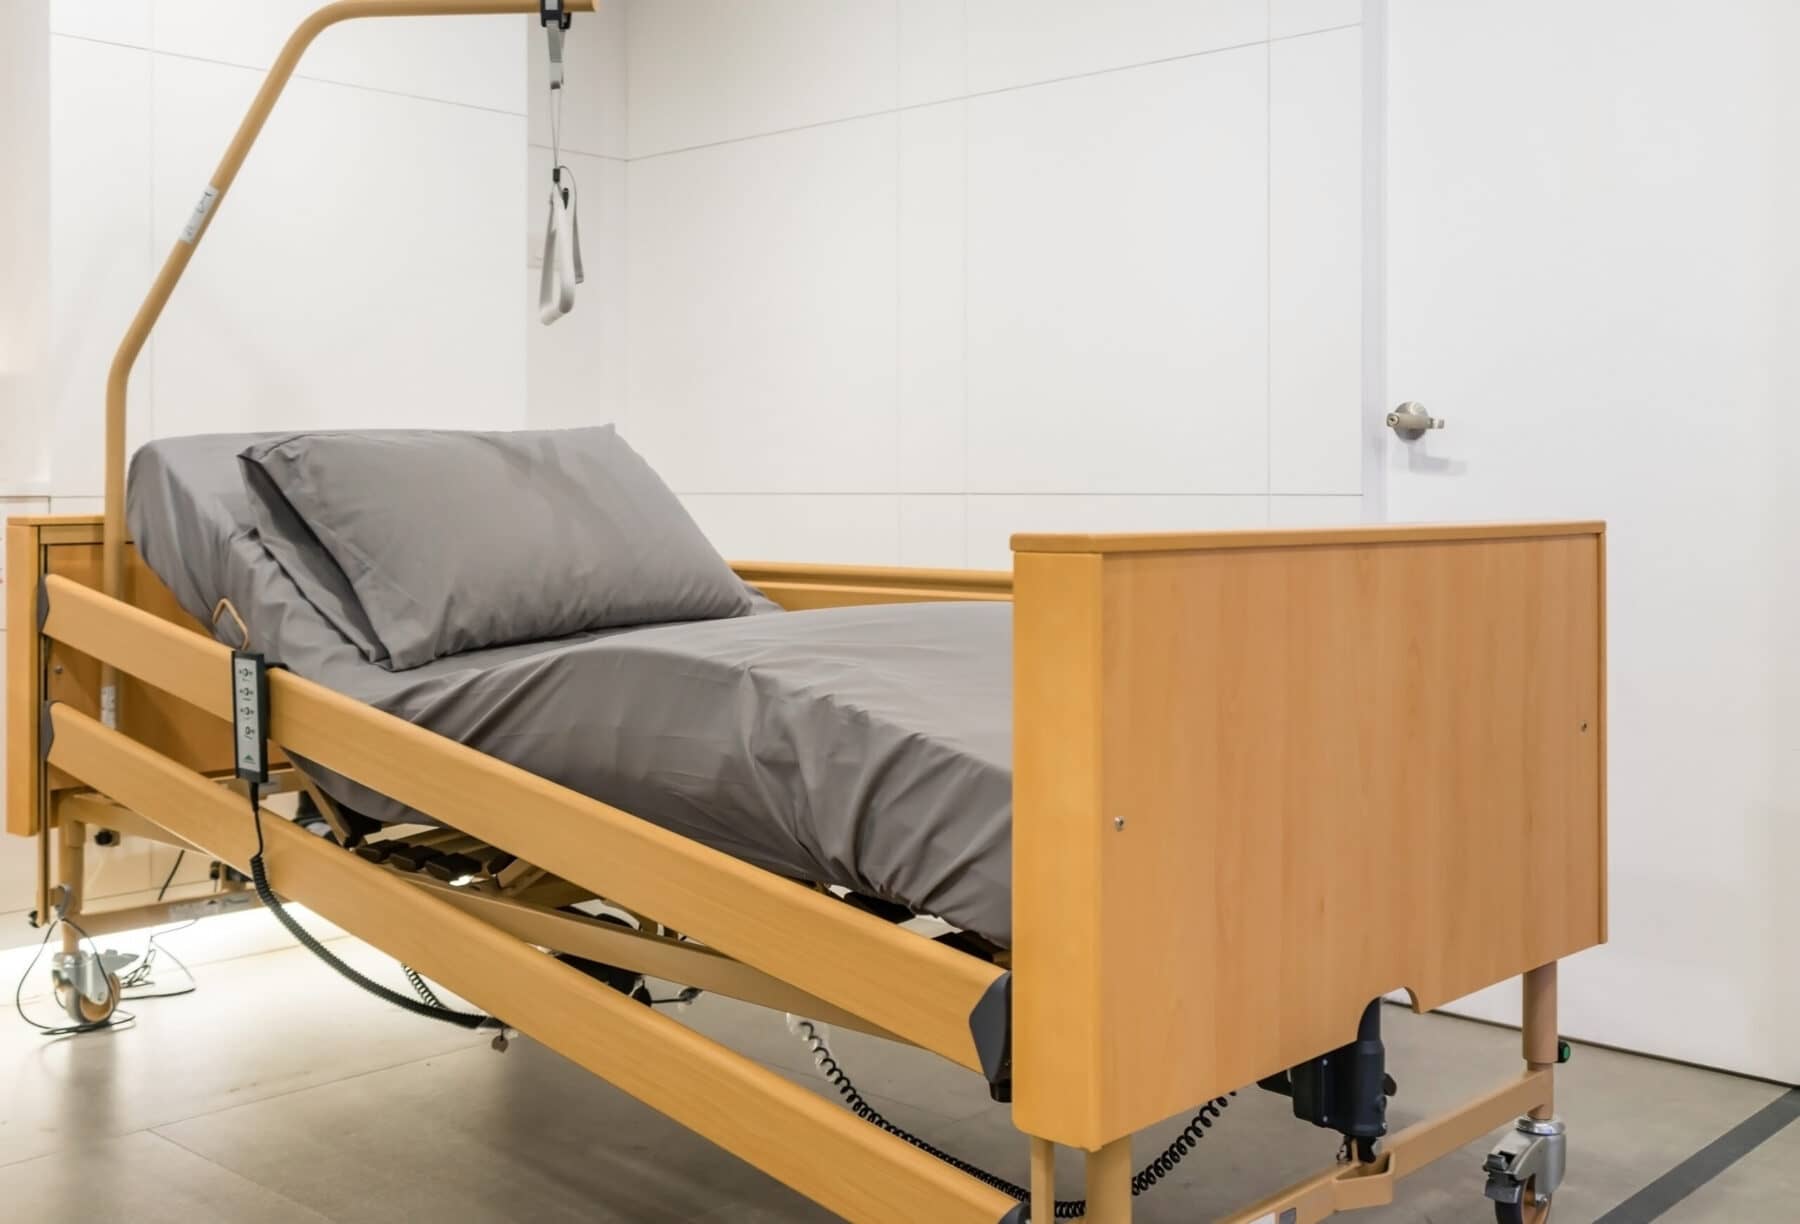 Buying Guide: Adjustable Beds